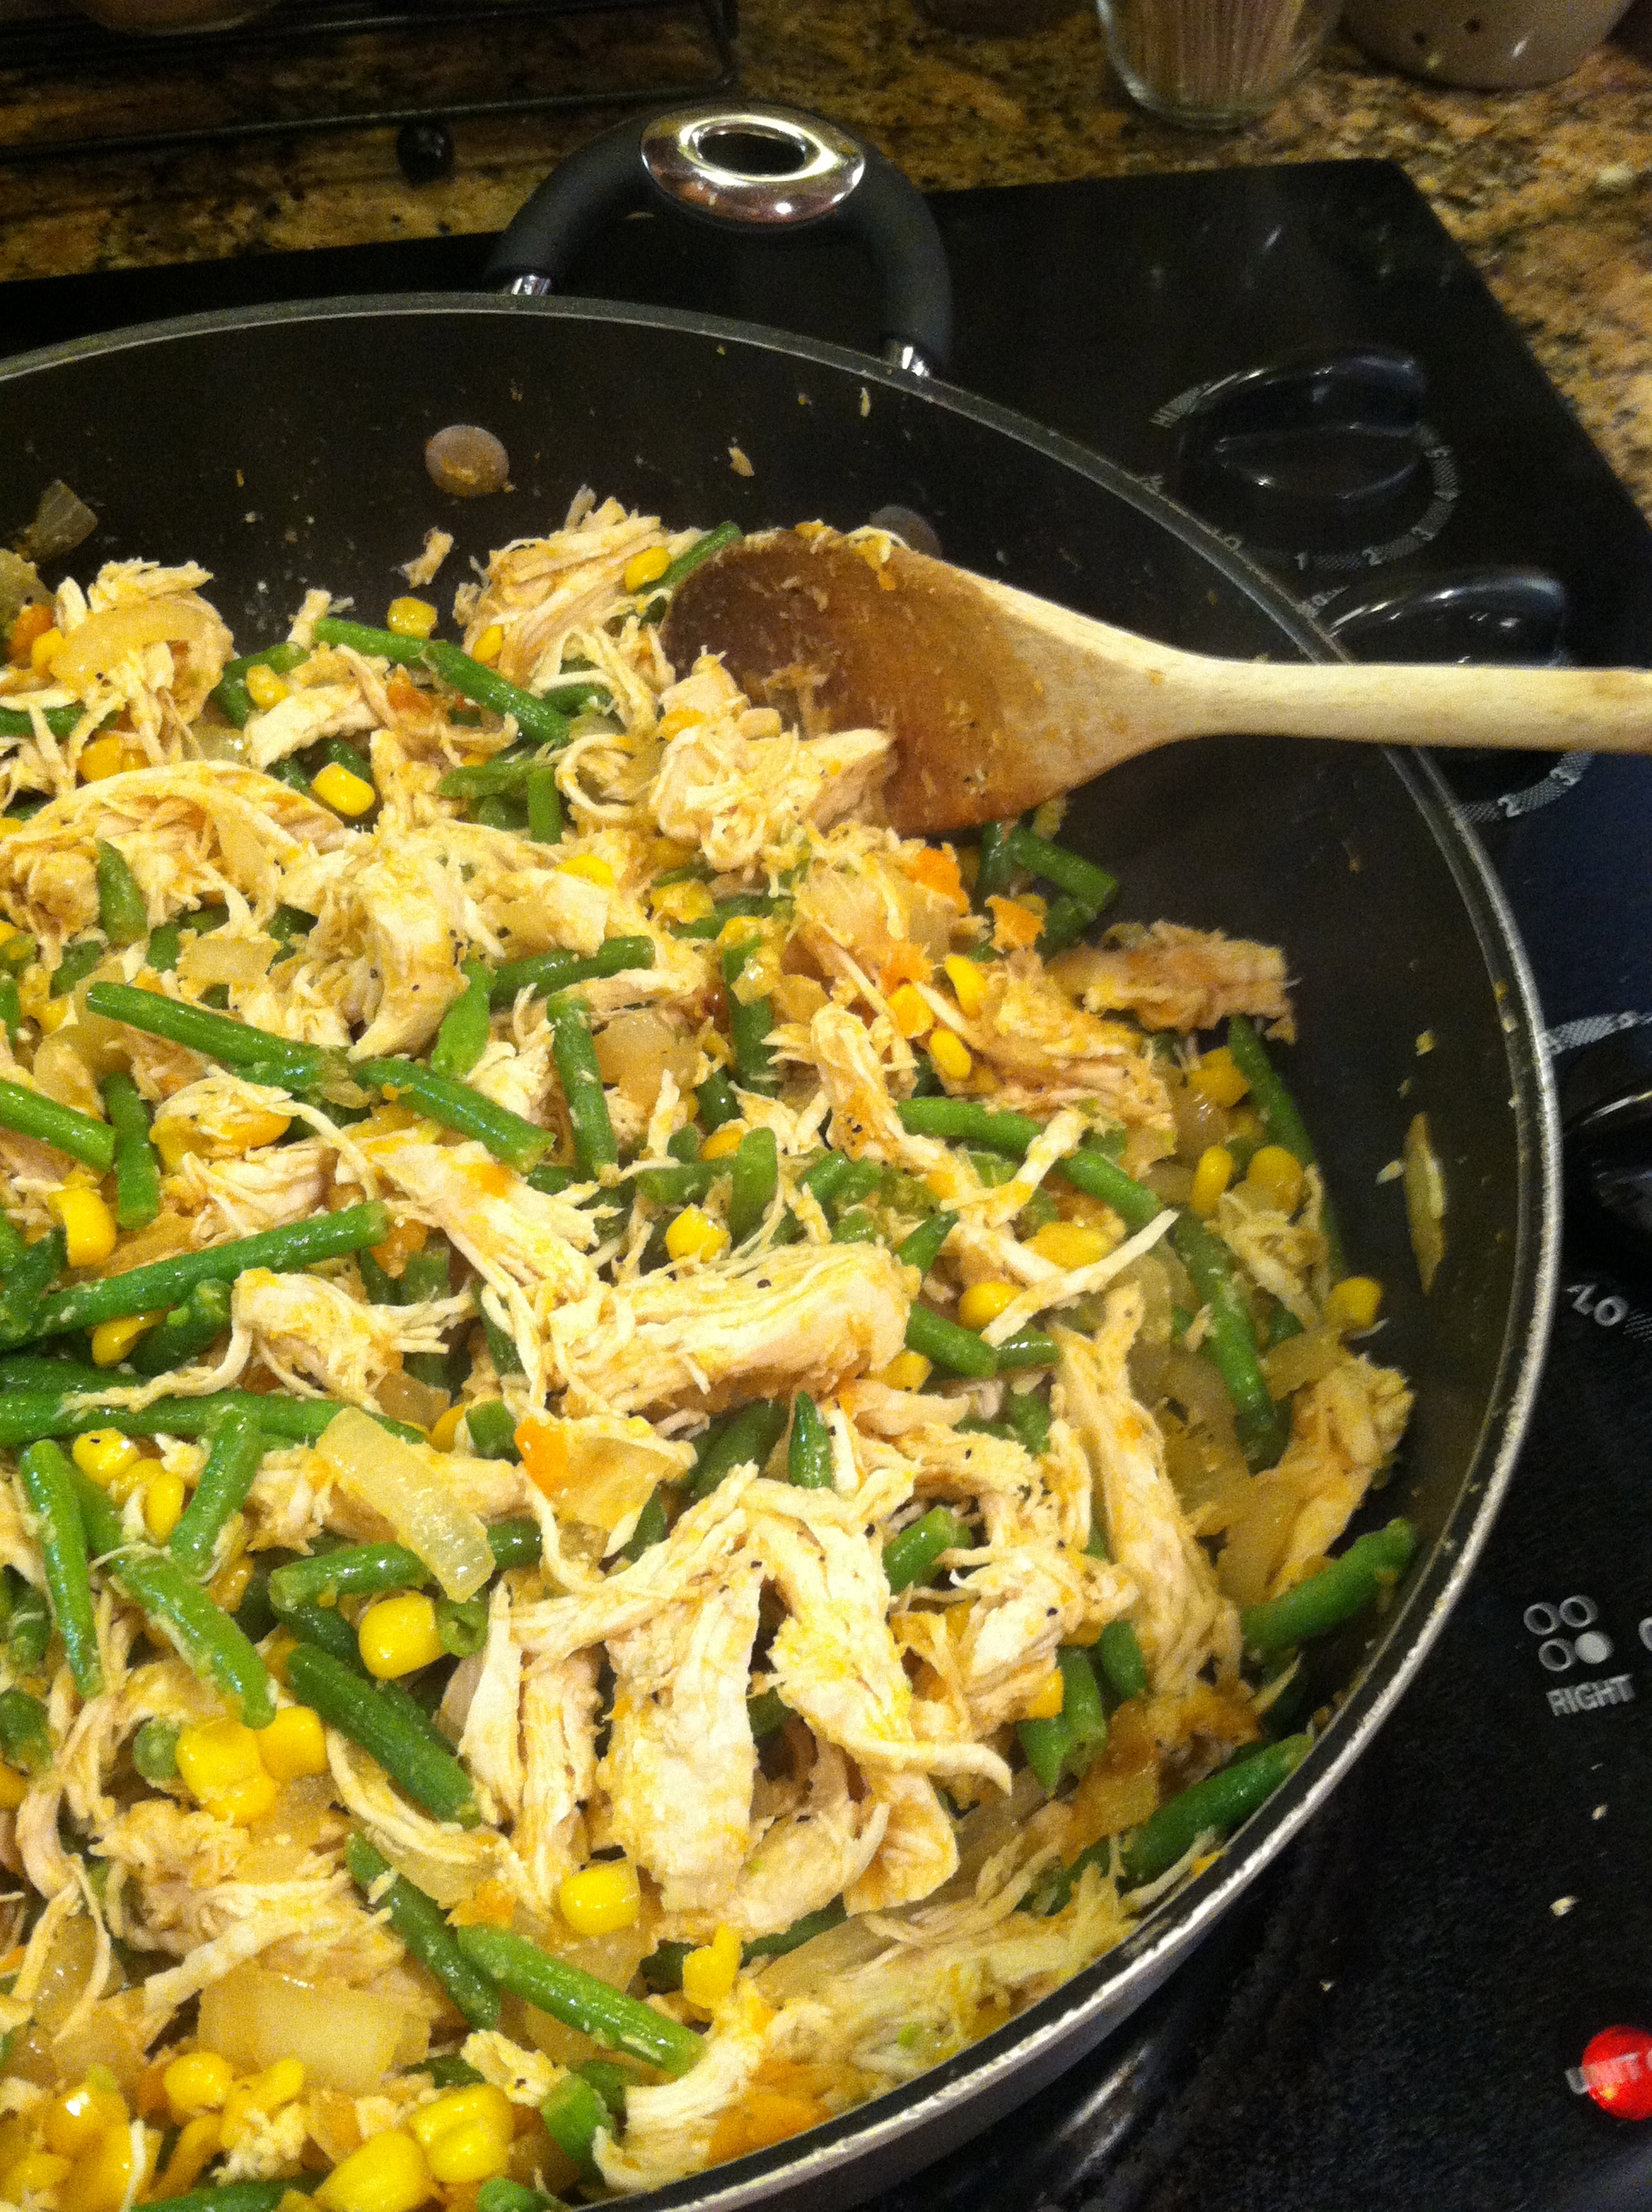 Skillet Meal’s are Great for Simple Start! – The Weight of My Weight